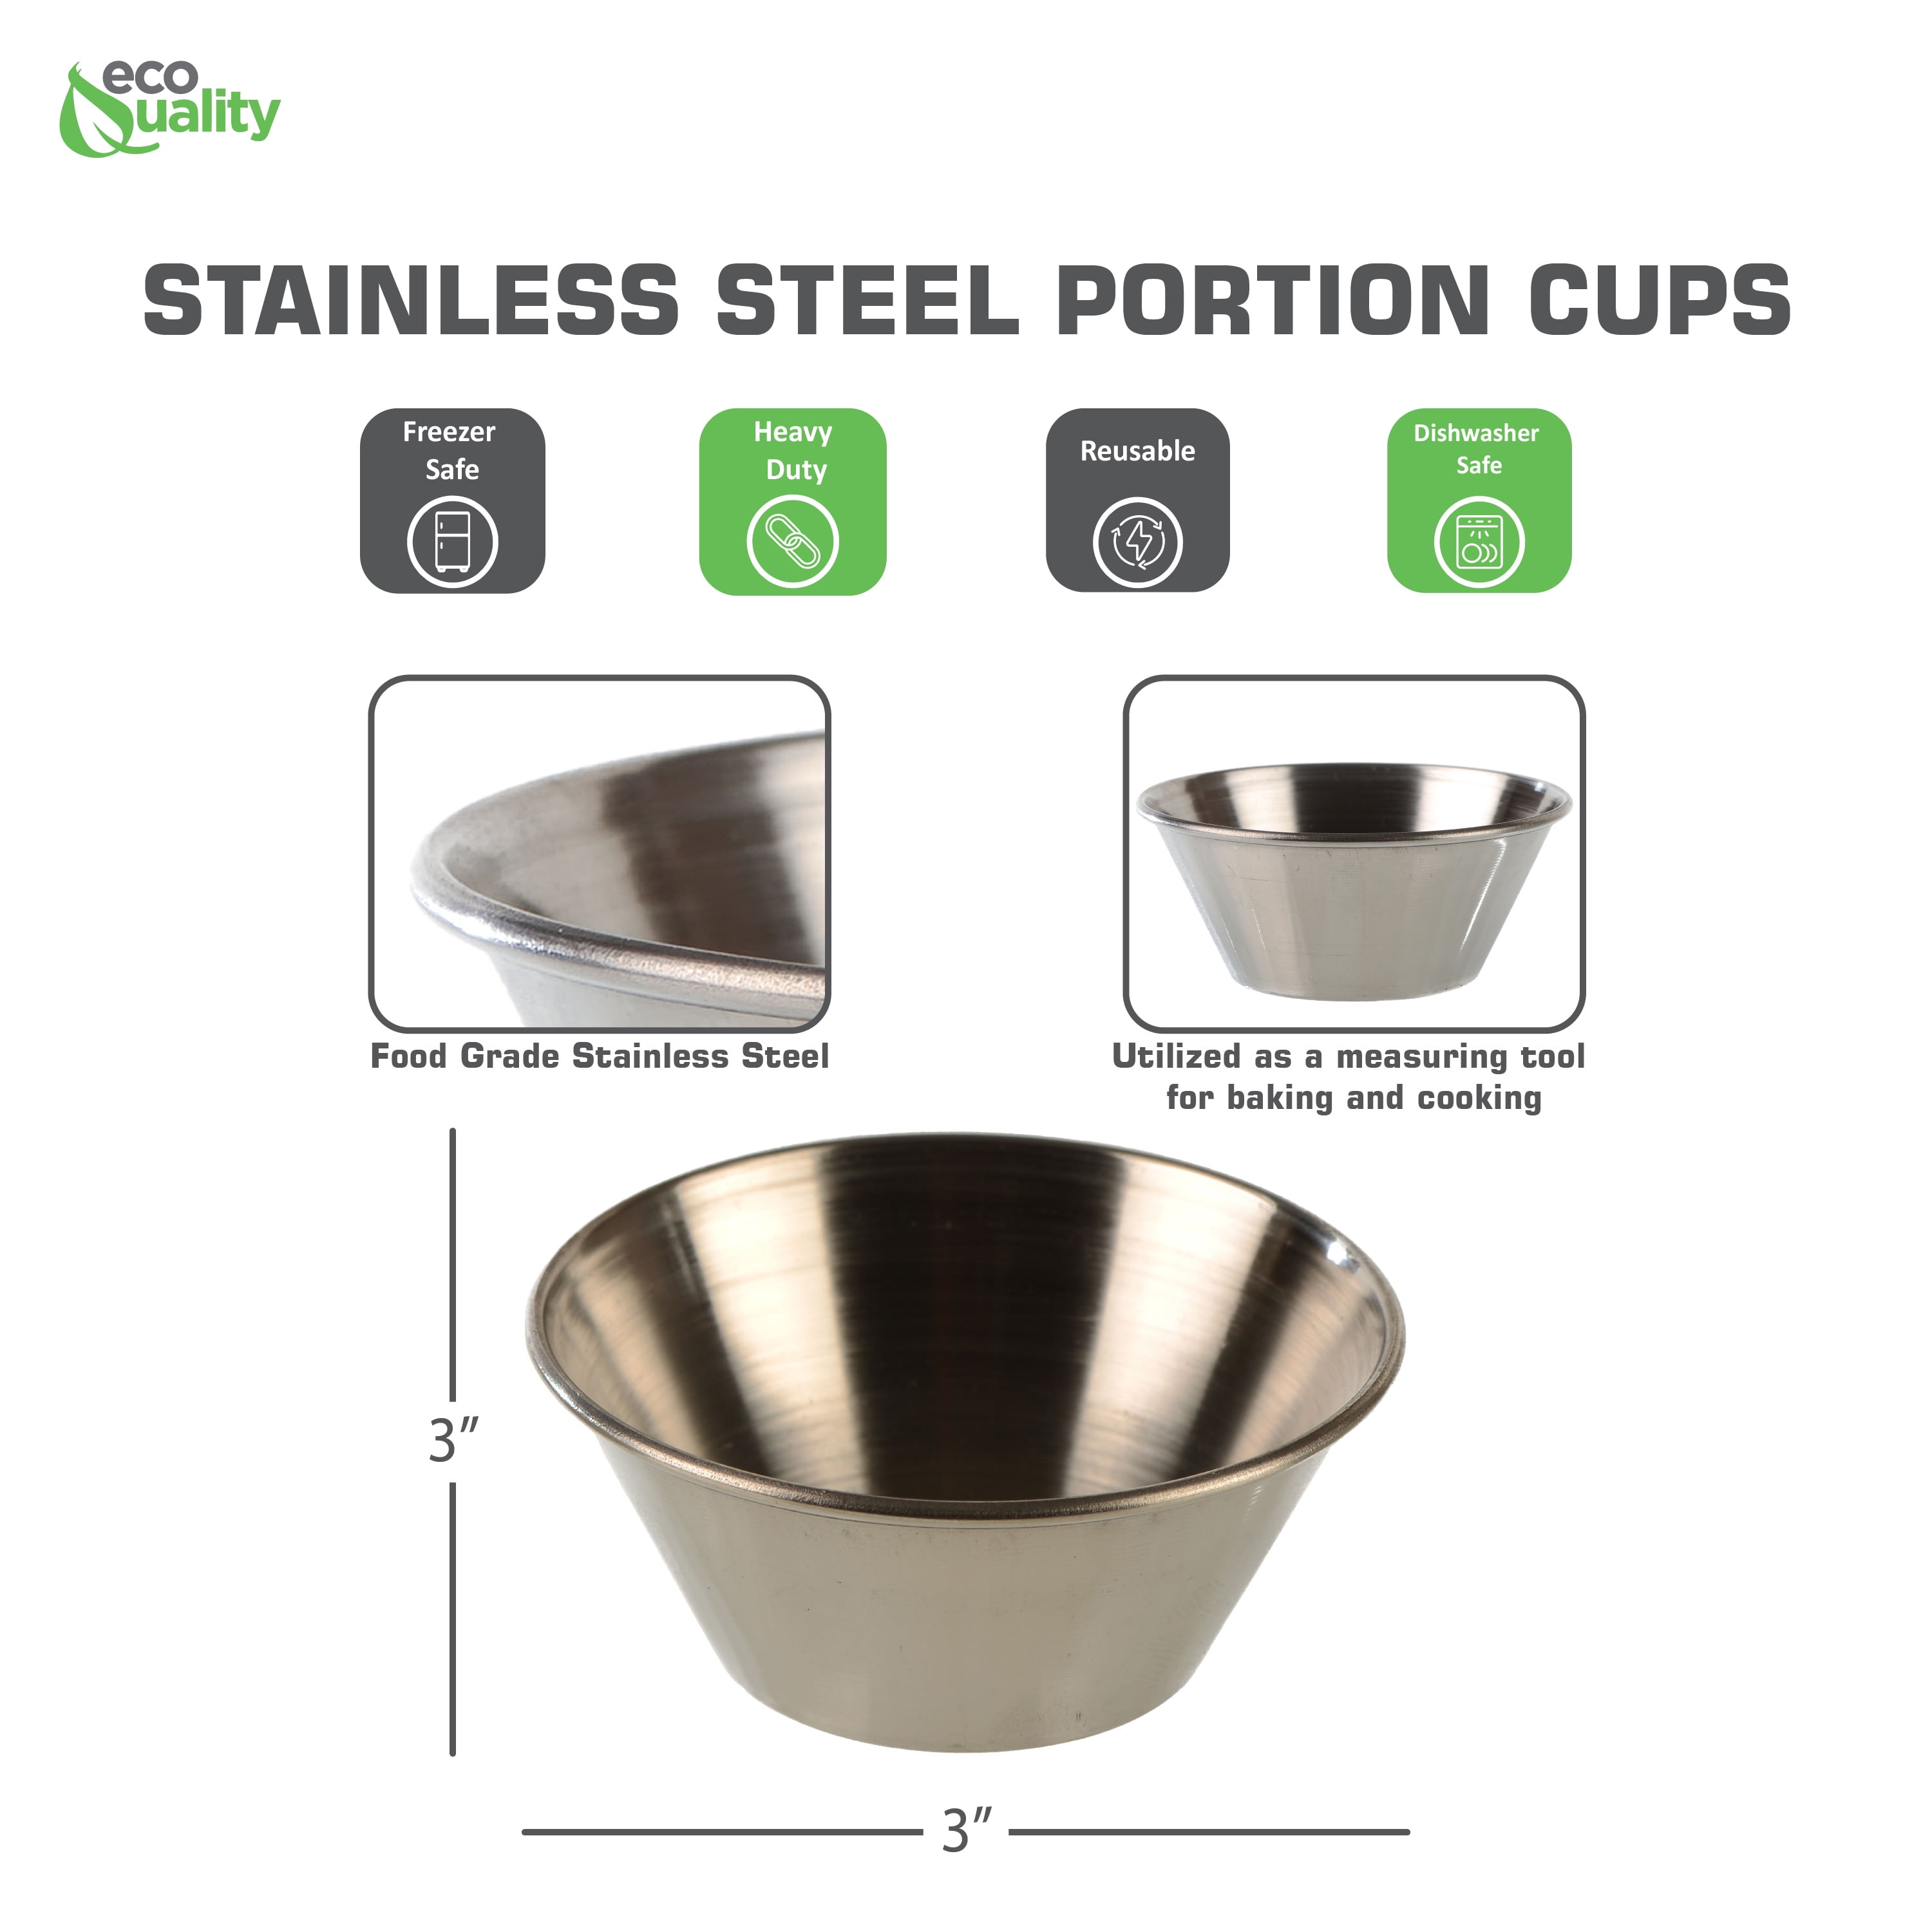 (24 Pack, 2 Sizes) Small Sauce Cups, Stainless Steel Ramekin Dipping Sauce  Cup, Commercial Grade Individual Round Condiment Cups (12 of - 1.5oz: 12 of